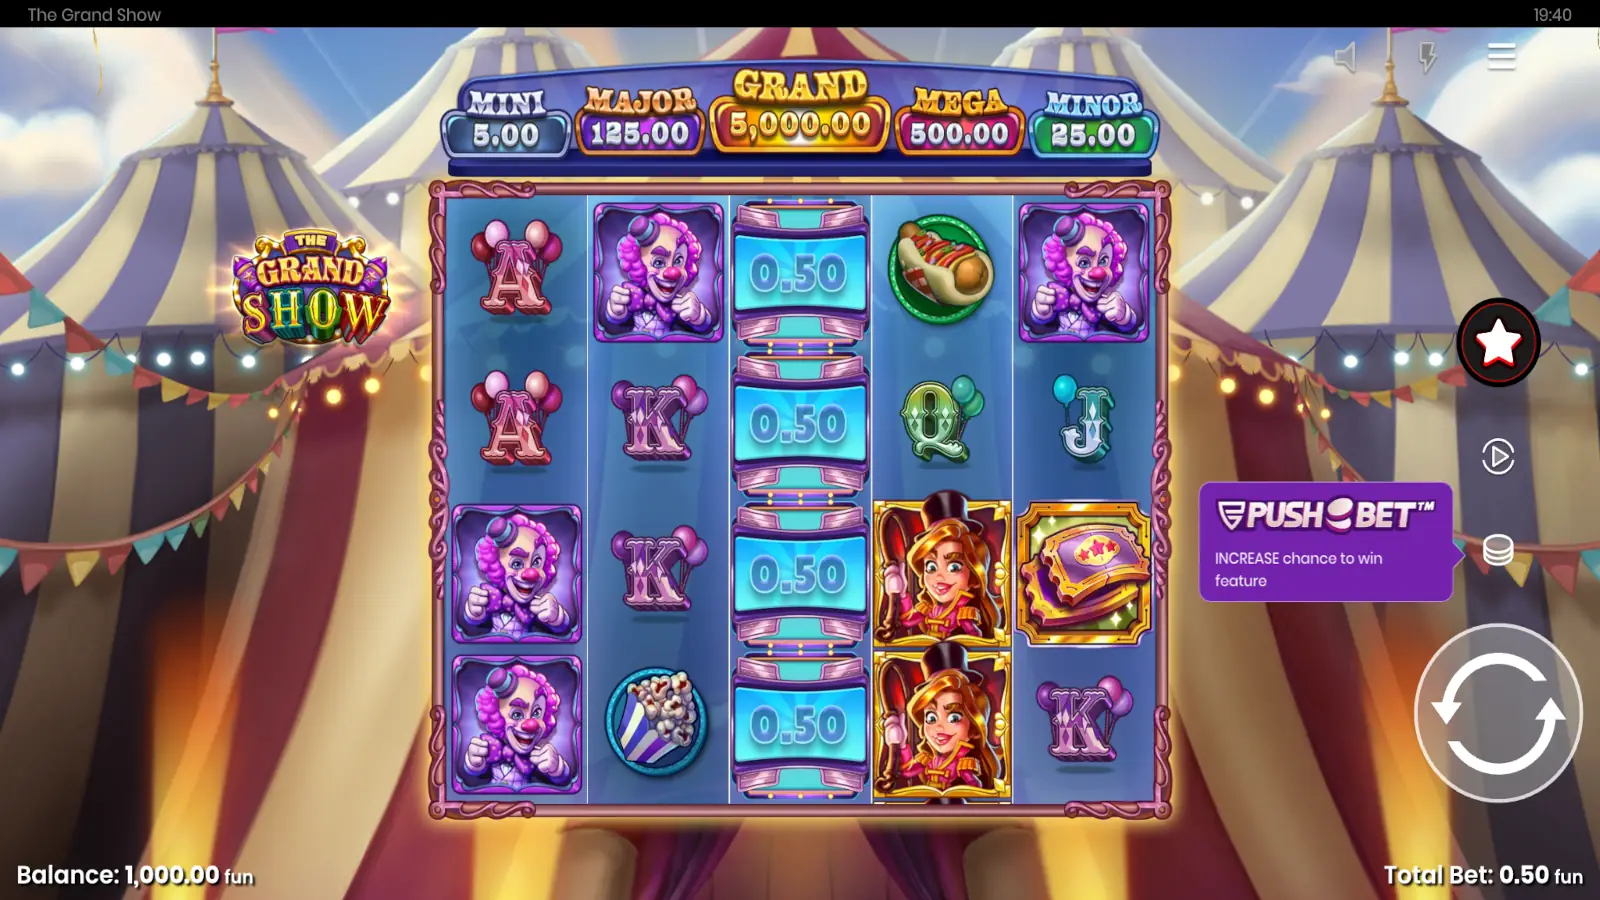 The Grand Show Slot Rules and Gameplay